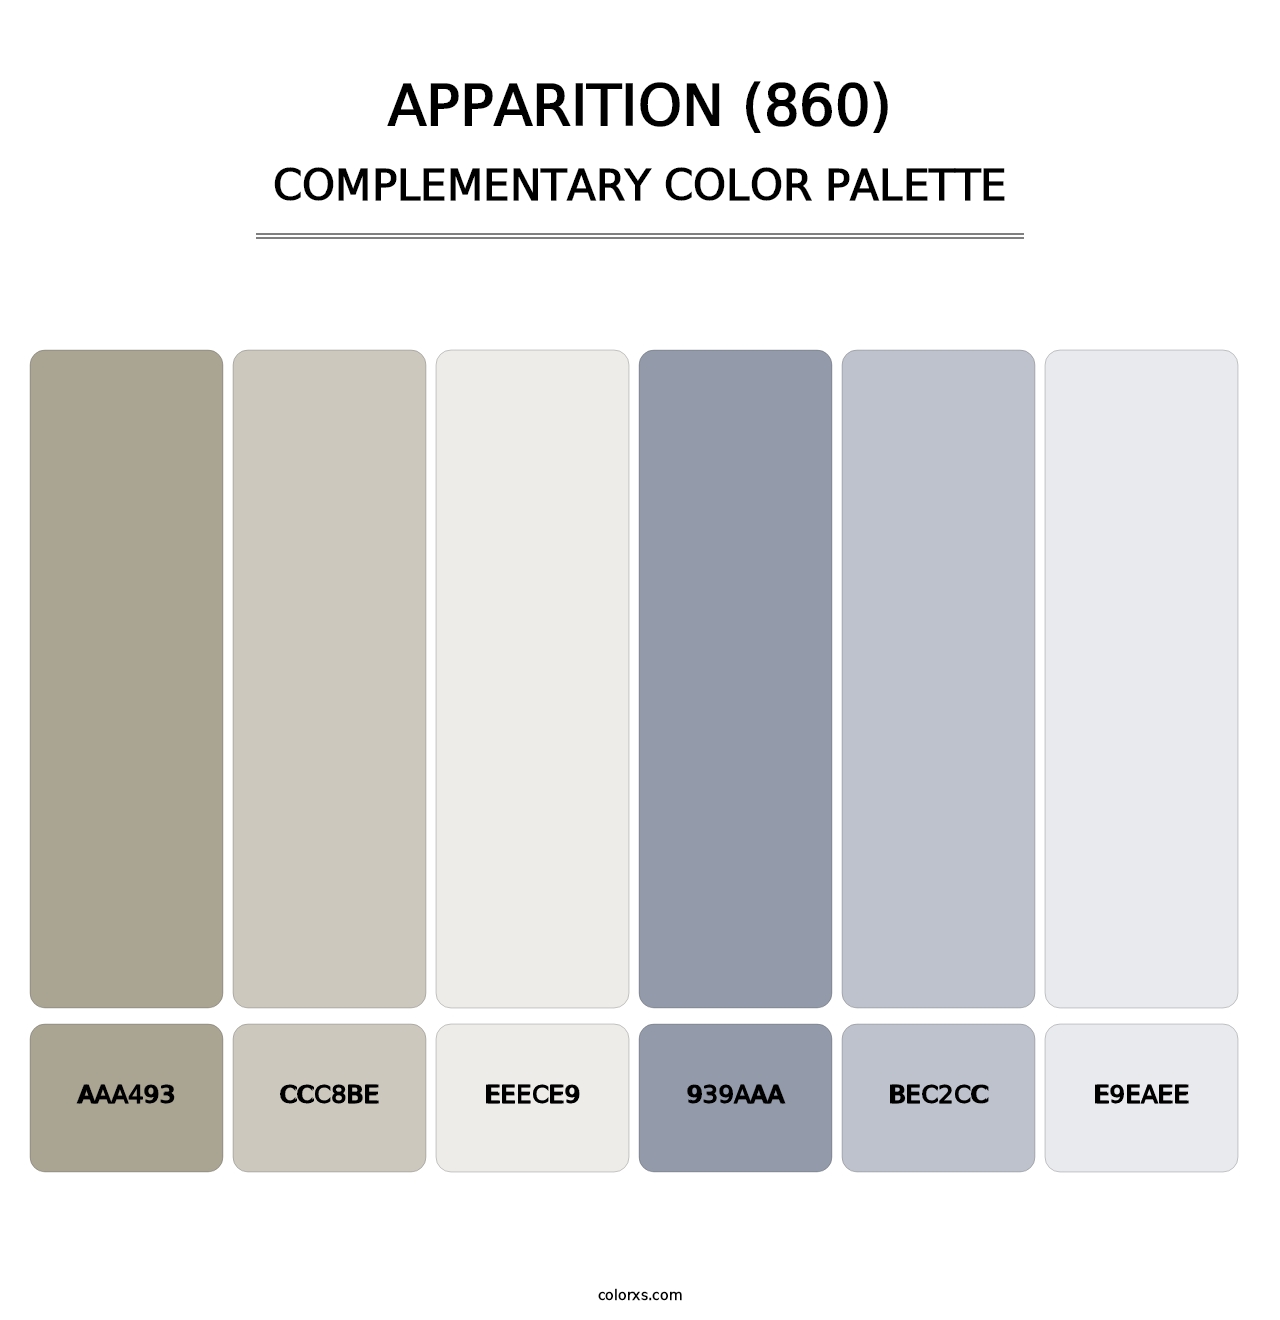 Apparition (860) - Complementary Color Palette